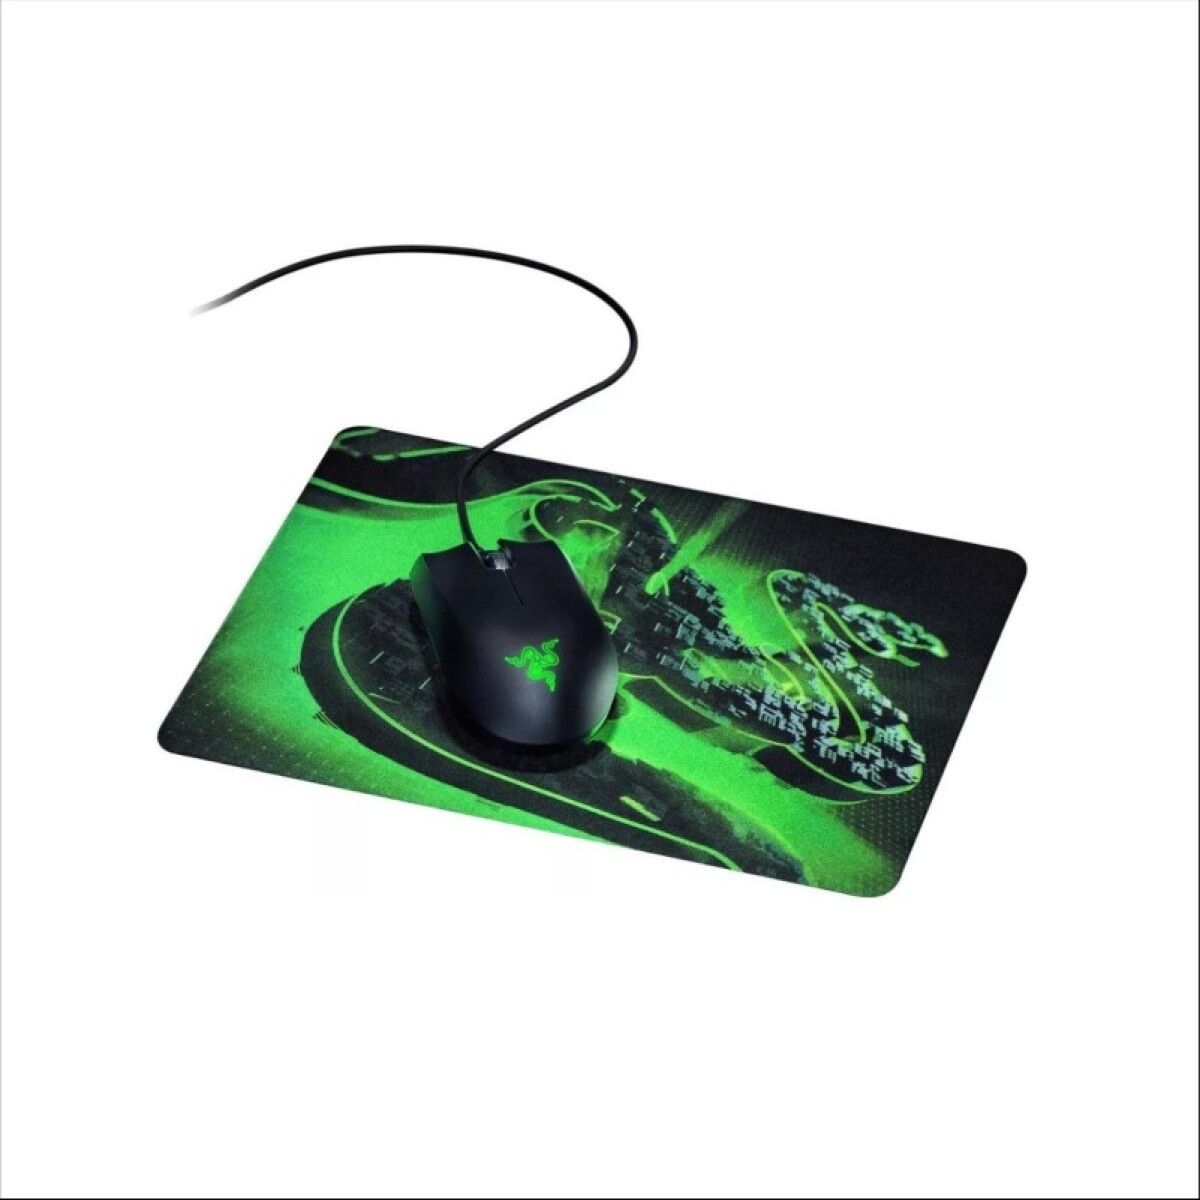 Combo Gamer Mouse y Mouse Pad Razer Abyssus Lite y Goliathus 